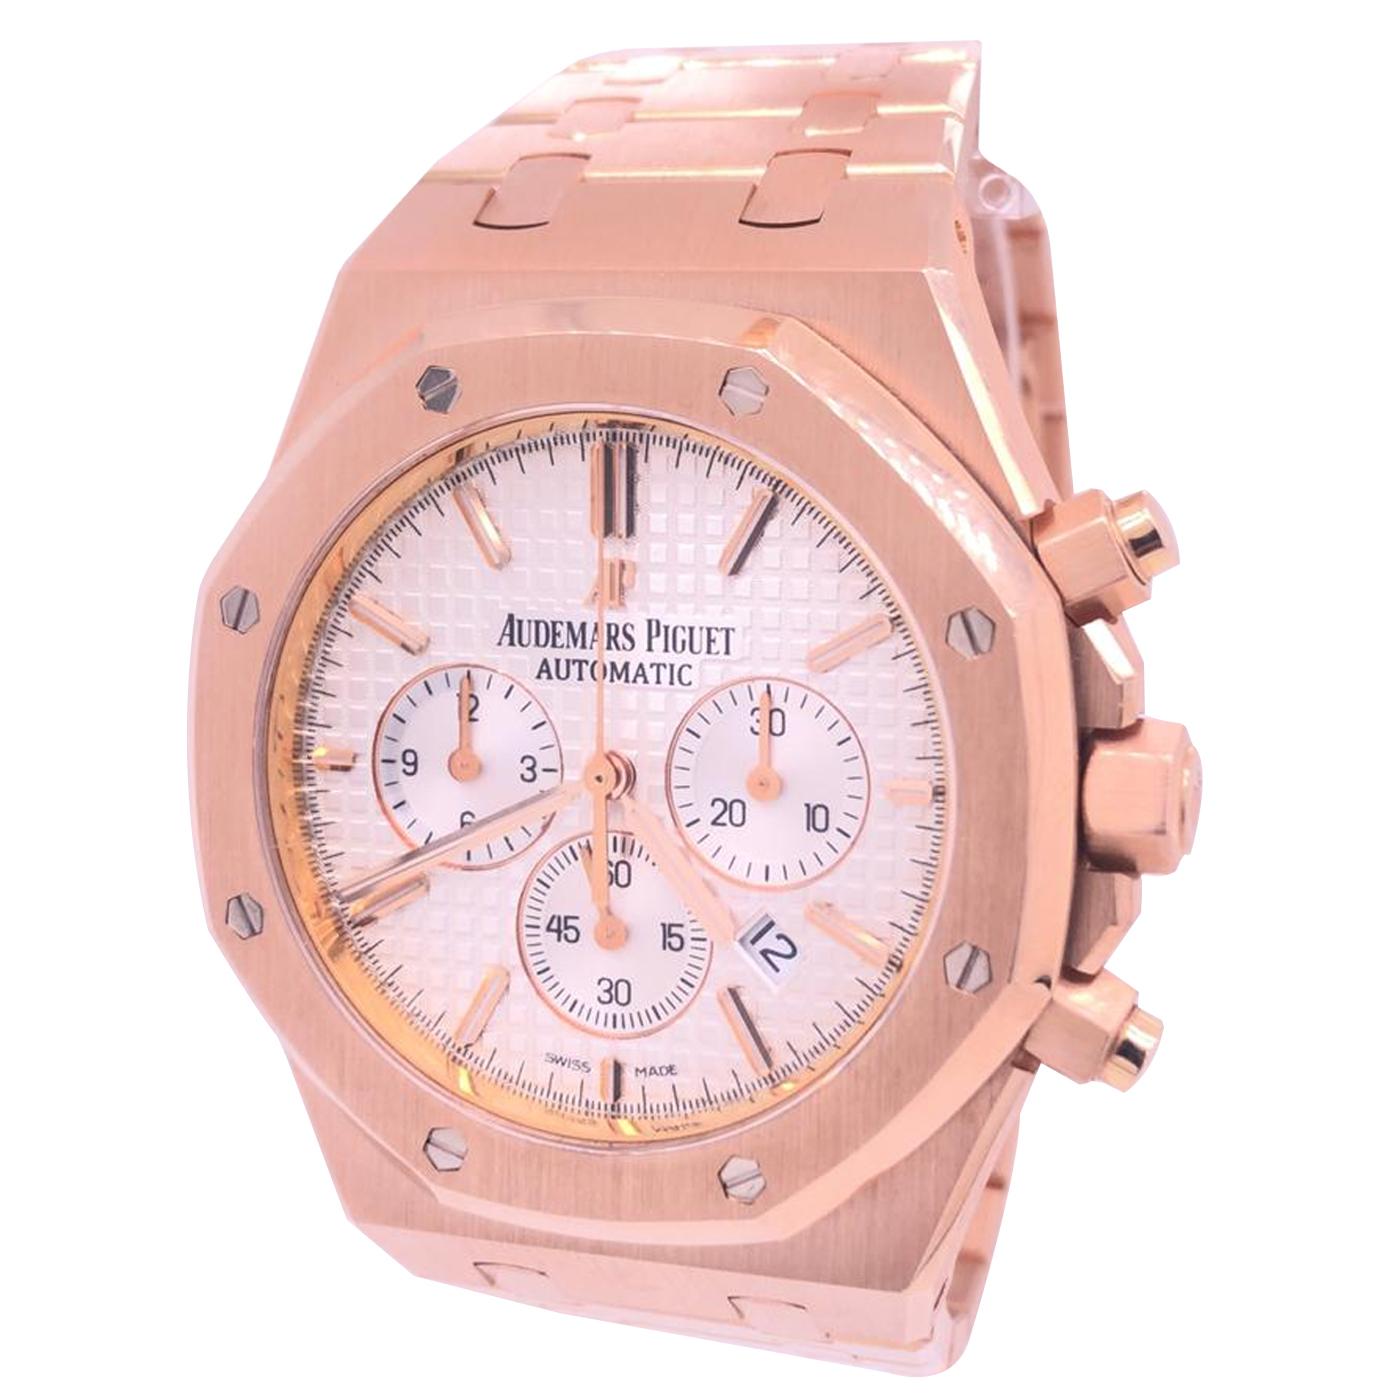 Audemars Piguet Royal Oak Chronograph Silver Dial Automatic 26320OROO1220OR02. 18kt rose gold case with an 18kt rose gold bracelet. Fixed bezel. Silver dial with gold-tone hands and index hour markers. Minute markers around the outer rim. Dial Type: